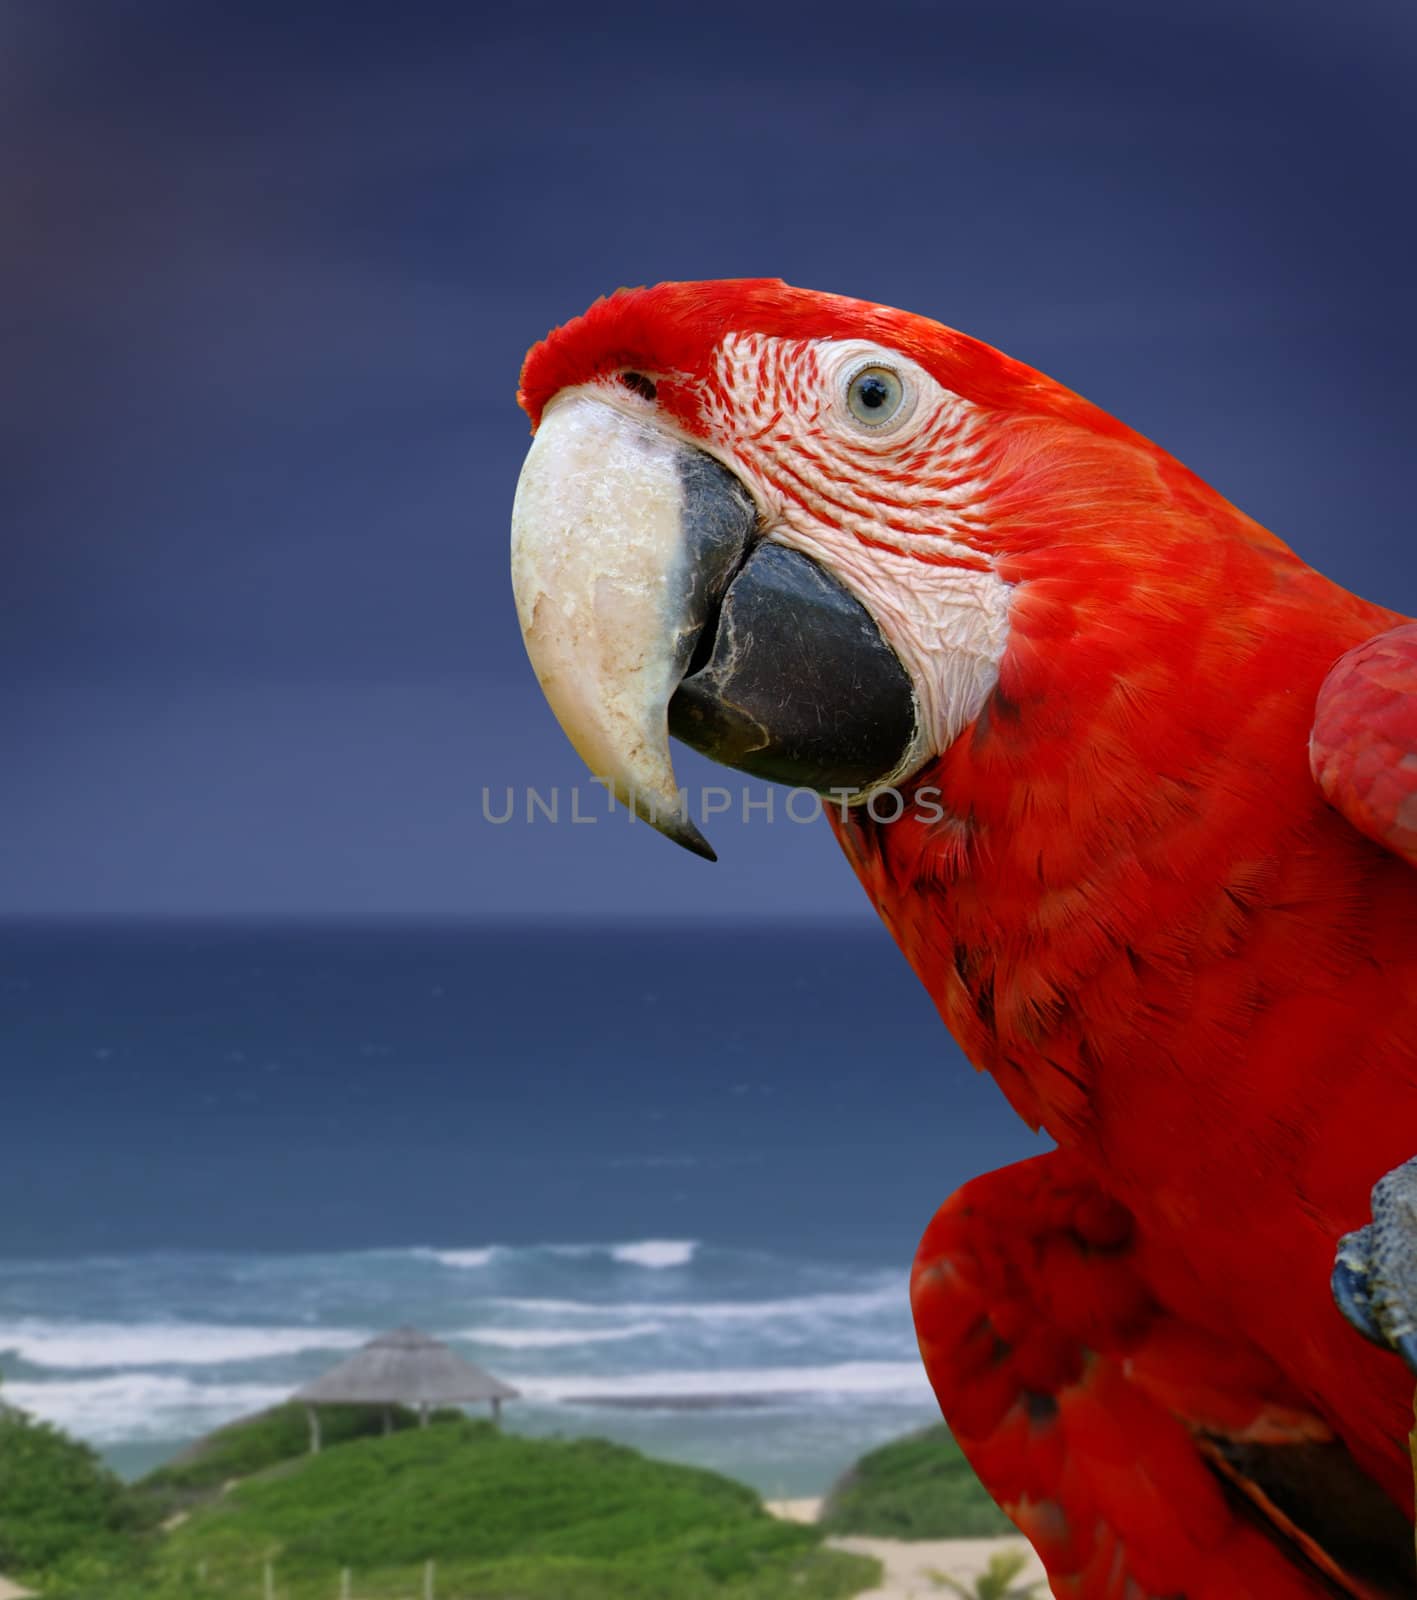 Parrot by the sea by alistaircotton